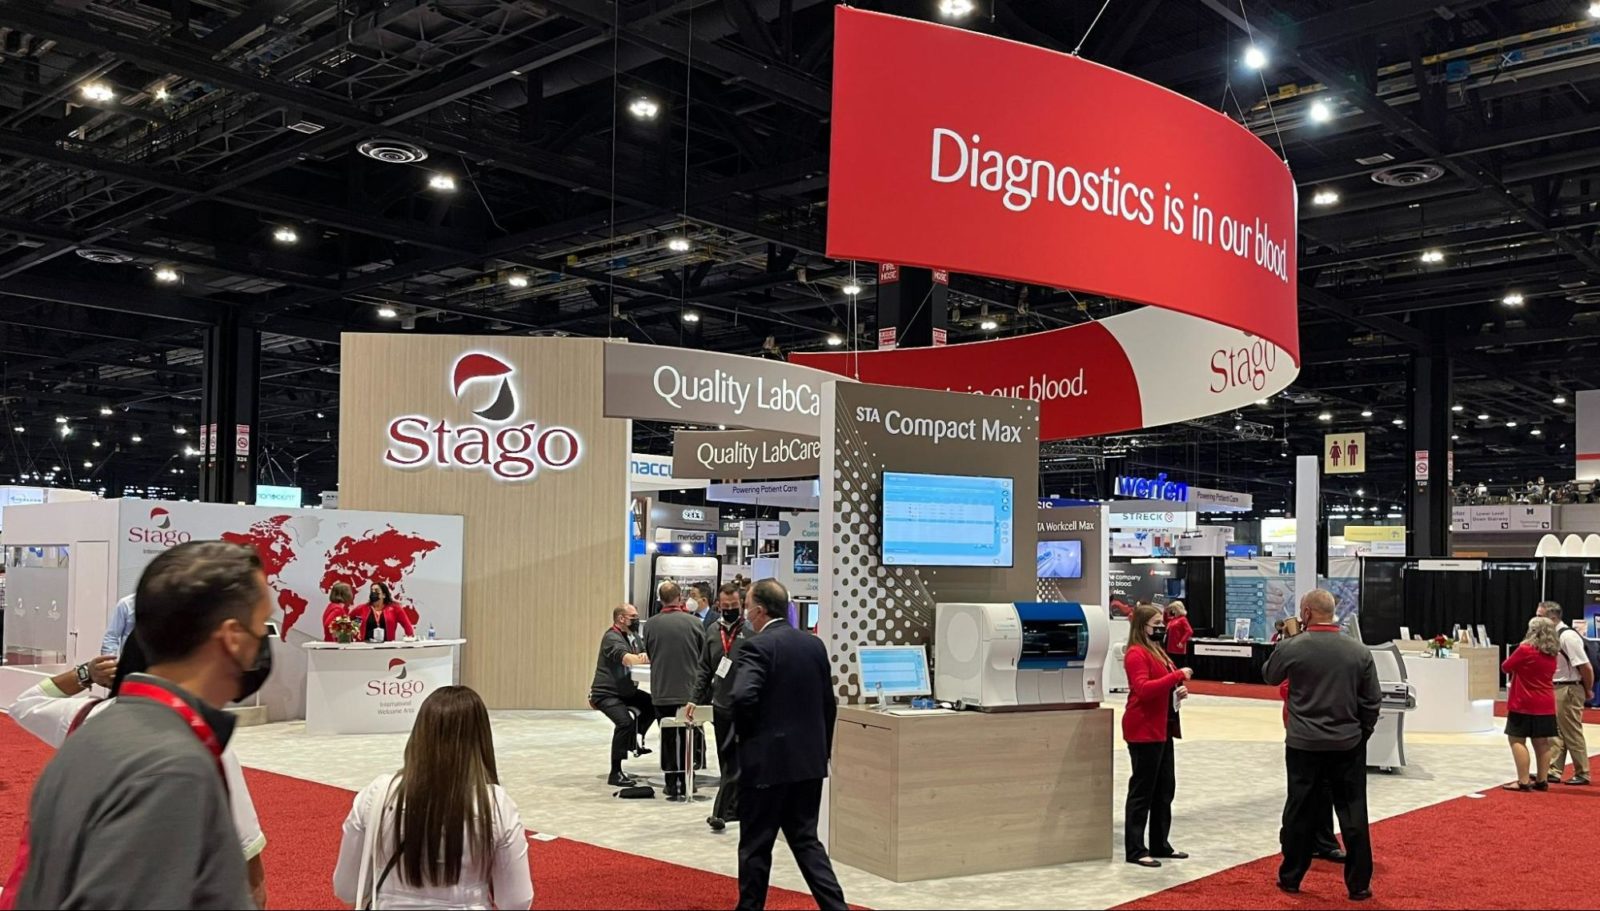 Stago's booth at the trade show